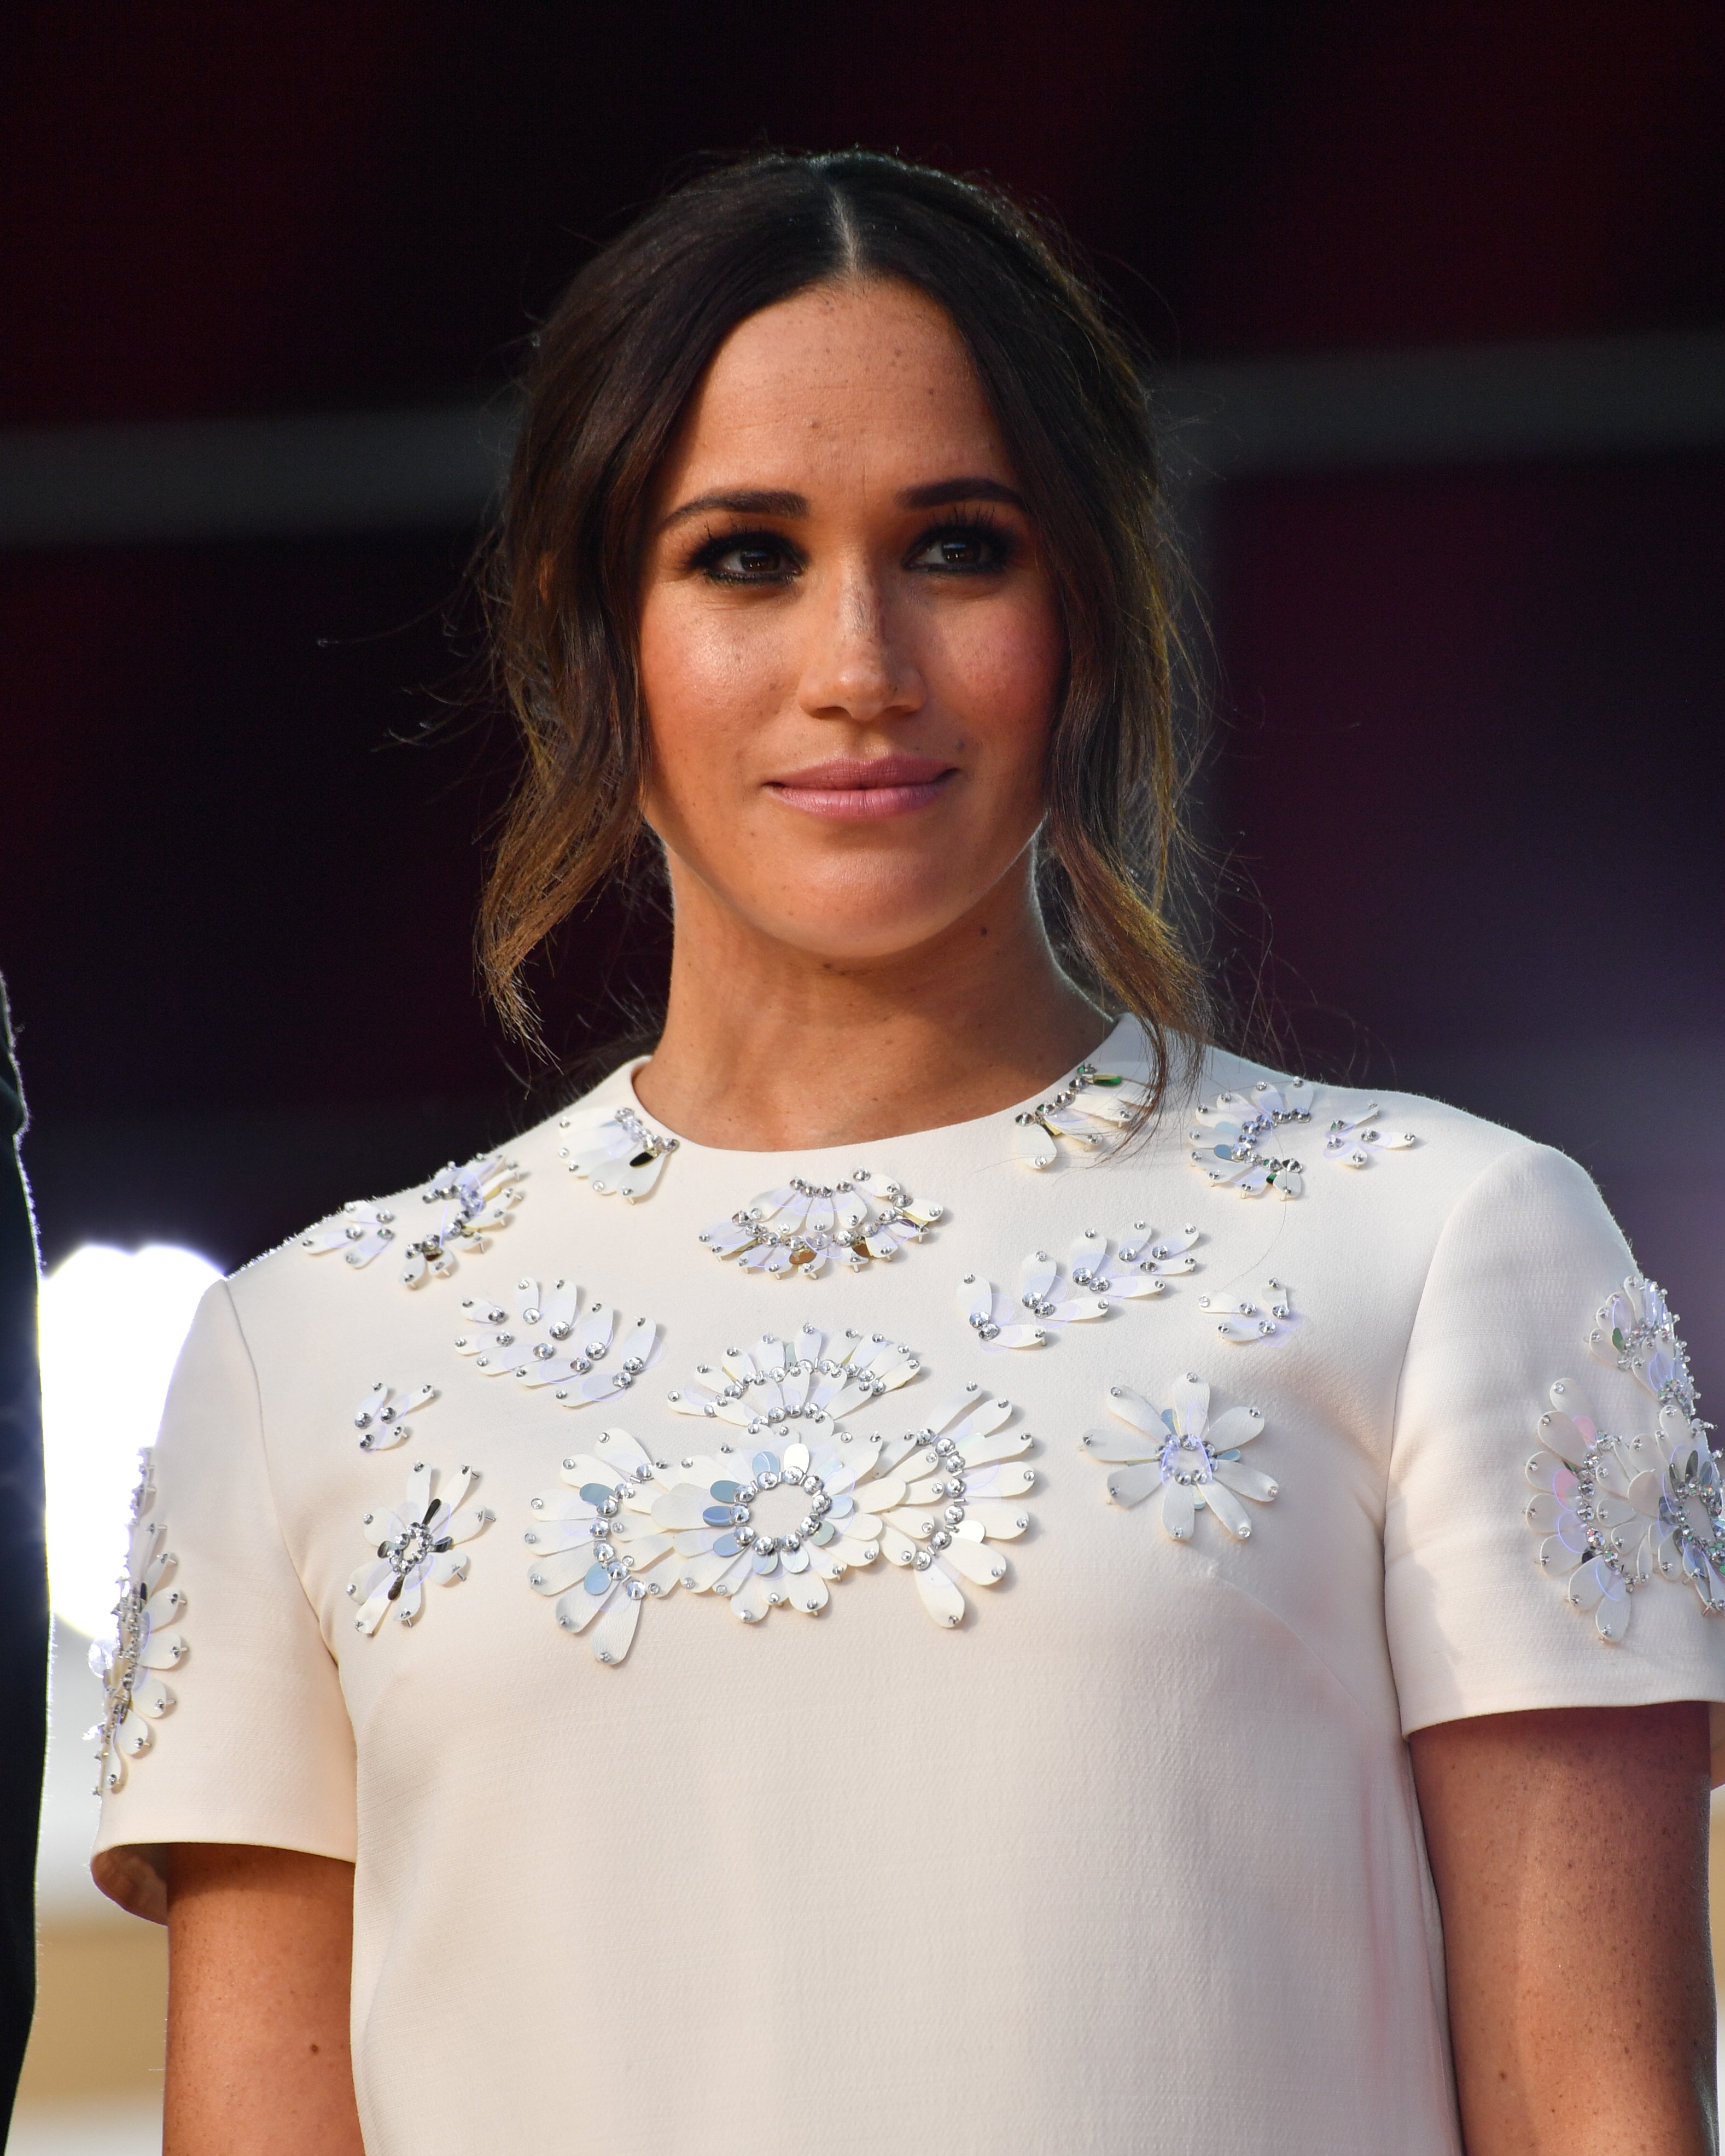 Meghan Markle at Global Citizen Live on September 25, 2021 in New York City. | Source: Getty Images